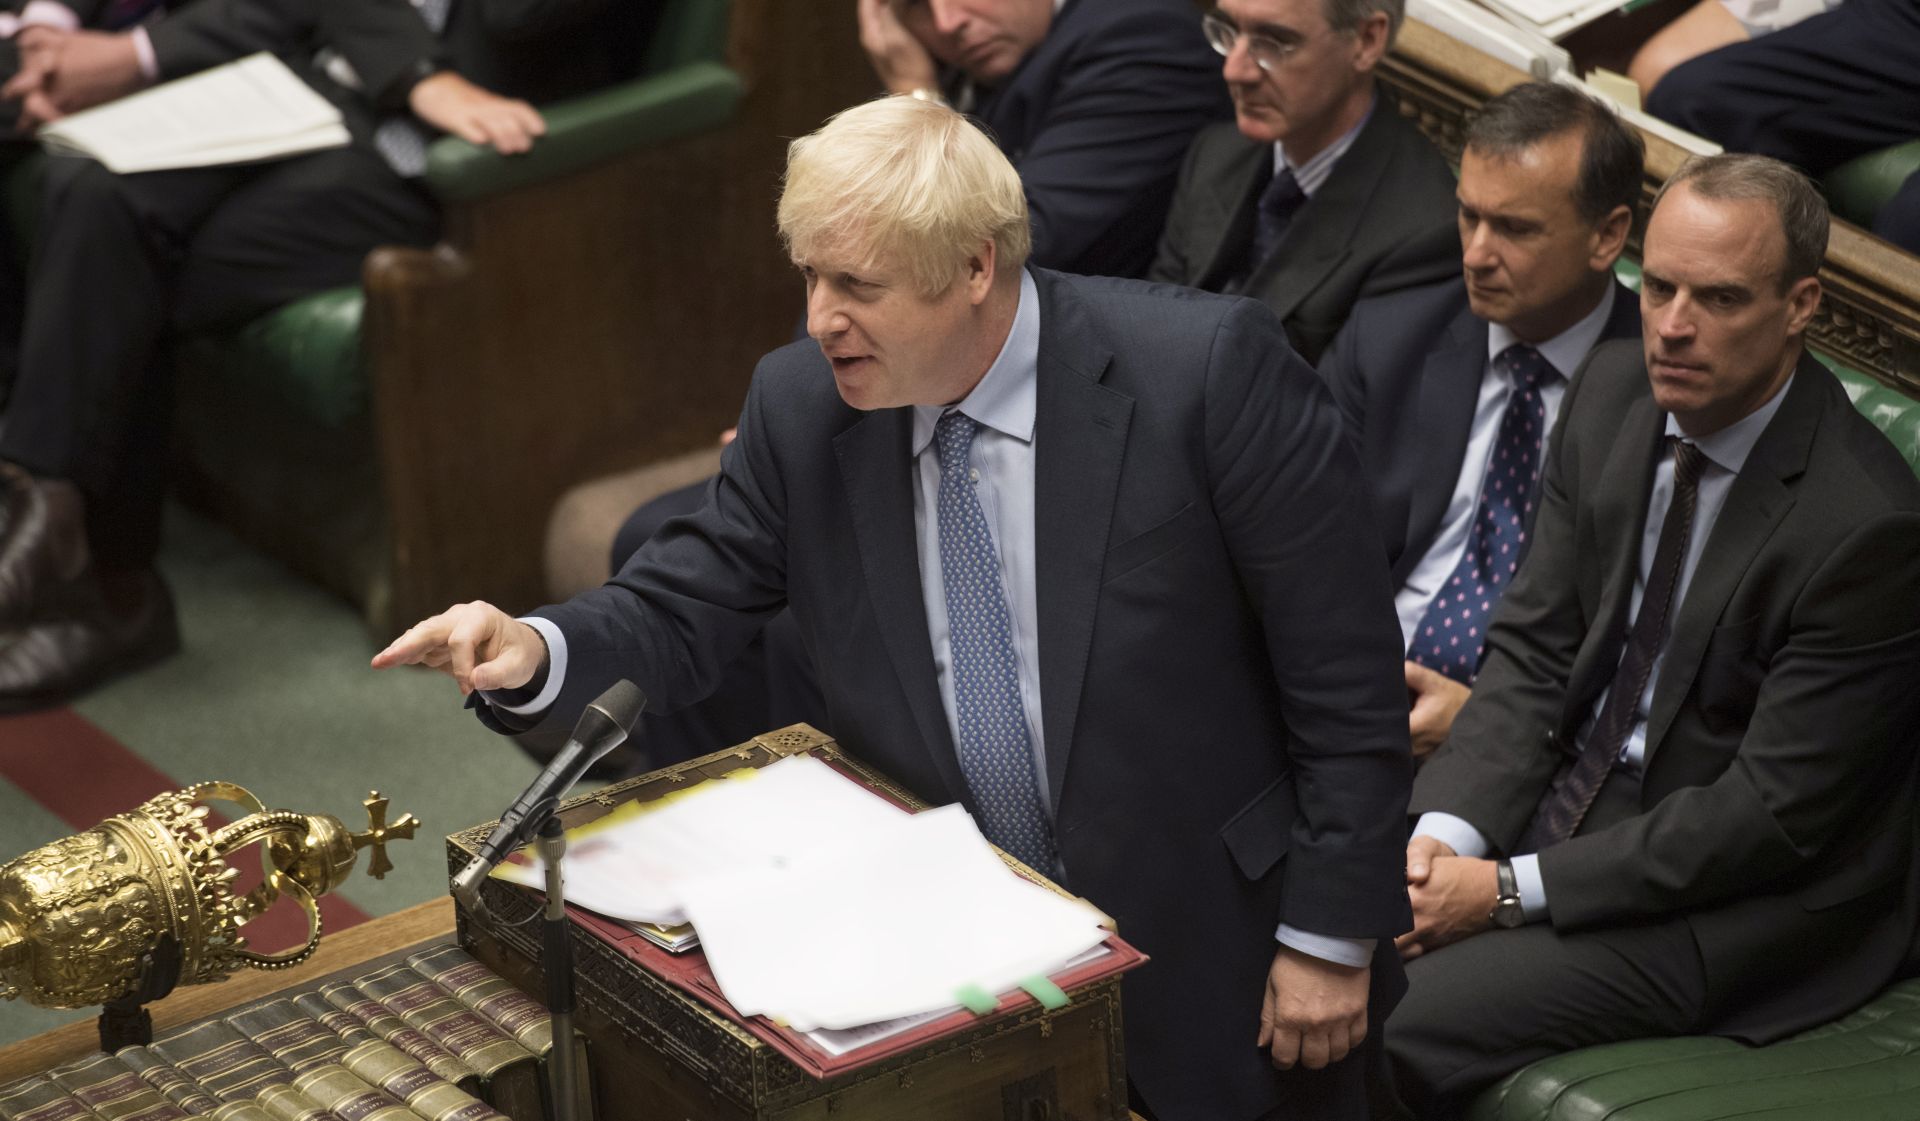 epa07817242 A handout photo made available by the UK Parliament shows British Prime Minister Boris Johnson gesturing during Prime Ministers Questions (PMQS) in the House of Commons in London, Britain, 04 September 2019.  EPA/JESSICA TAYLOR/UK PARLIAMENT / HANDOUT MANDATORY CREDIT: UK PARLIAMENT / JESSICA TAYLOR HANDOUT EDITORIAL USE ONLY/NO SALES